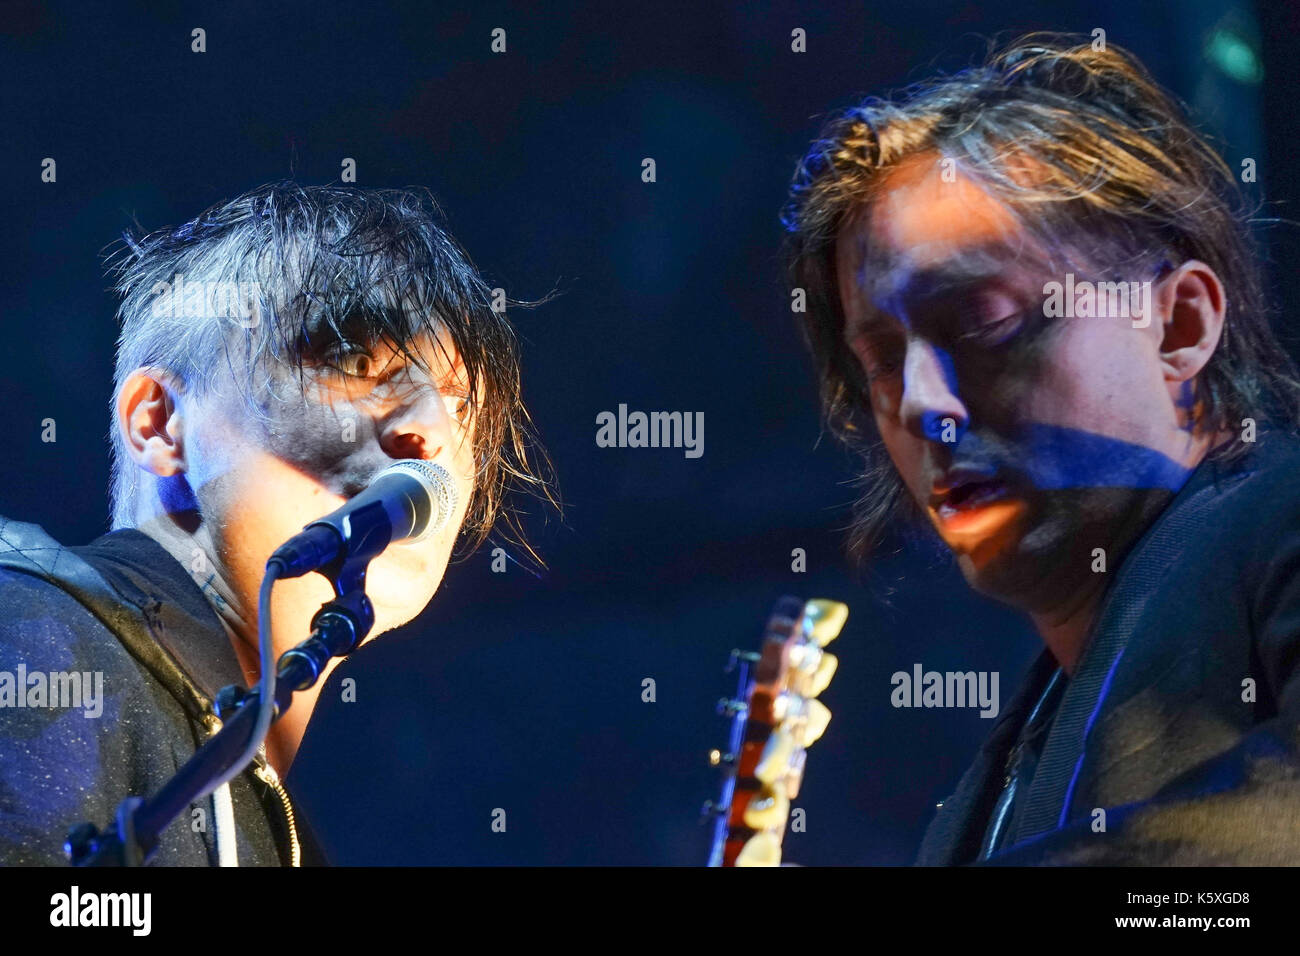 Pete Doherty (left) and Carl Barat of The Libertines performing live on the Main Stage at the 2017 OnBlackheath Festival in Blackheath, London. Photo date: Sunday, September 10, 2017. Photo credit should read: Roger Garfield/Alamy Stock Photo